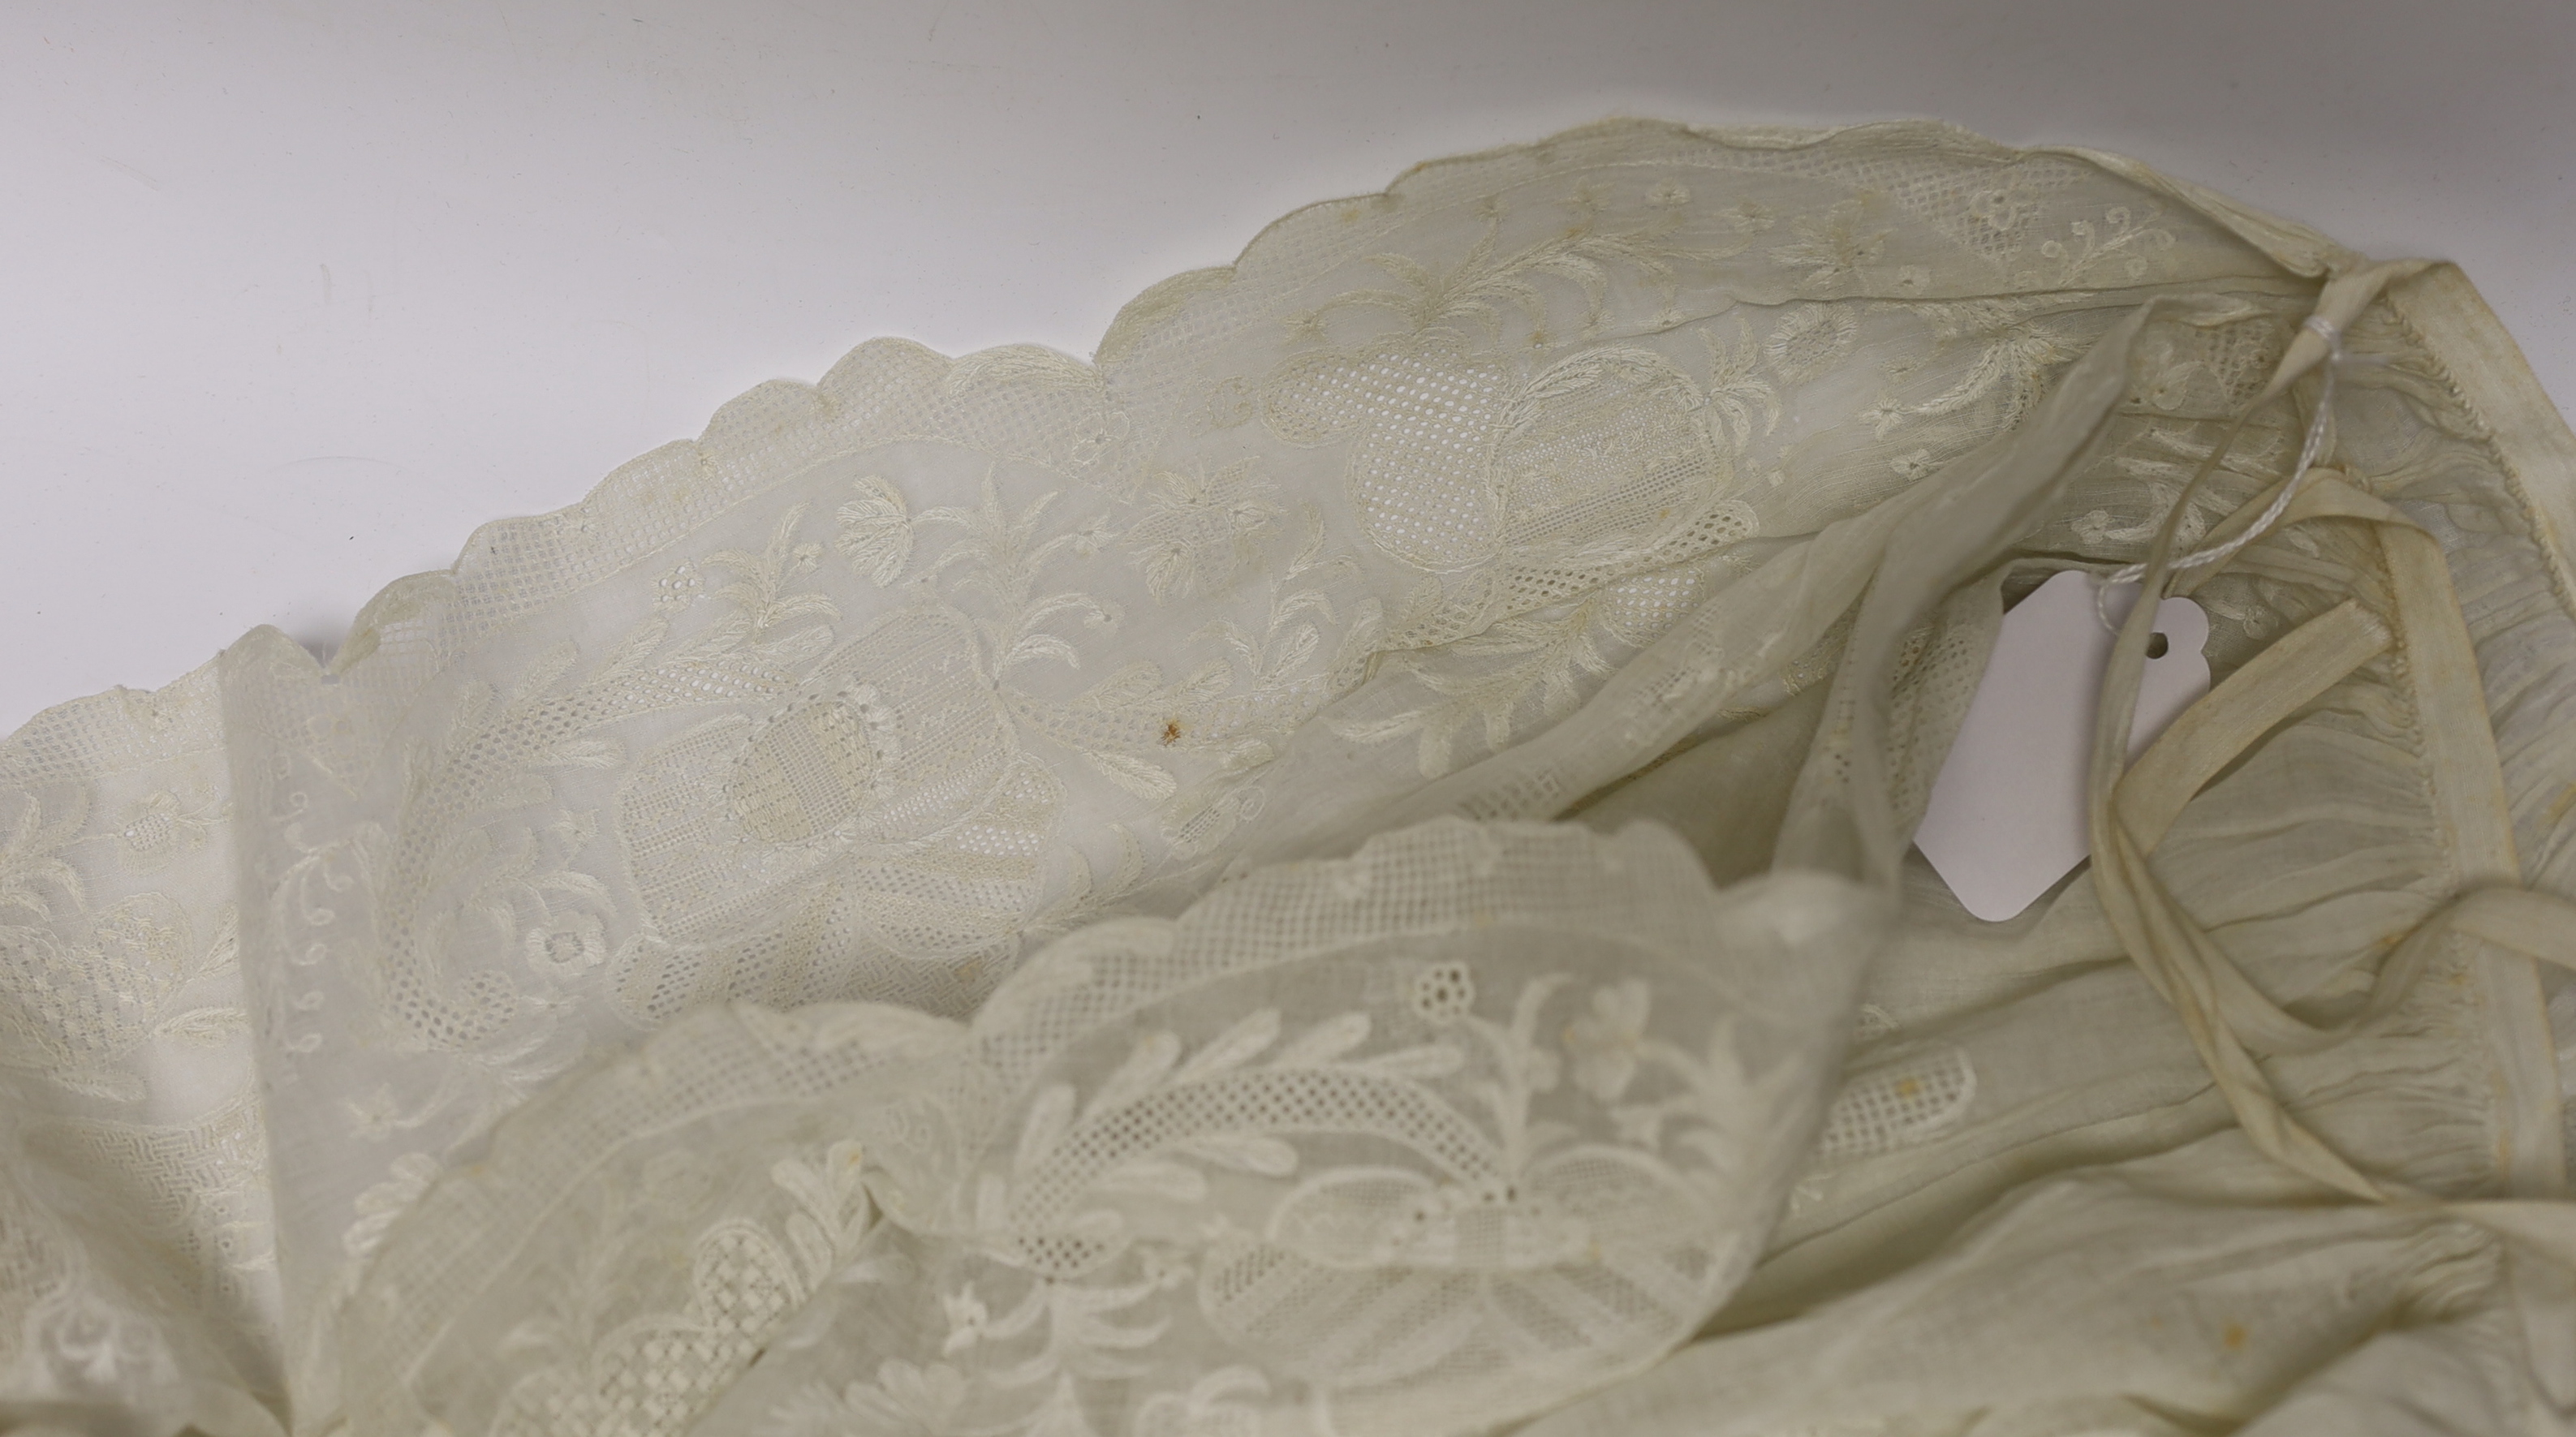 An 18th century Dresden worked apron, a white worked fine lawn stole, two panels of linen ribbon work, a ladies lace bonnet a similar pink satin bonnet a white worked blouse (partially made) and panel to a christening go